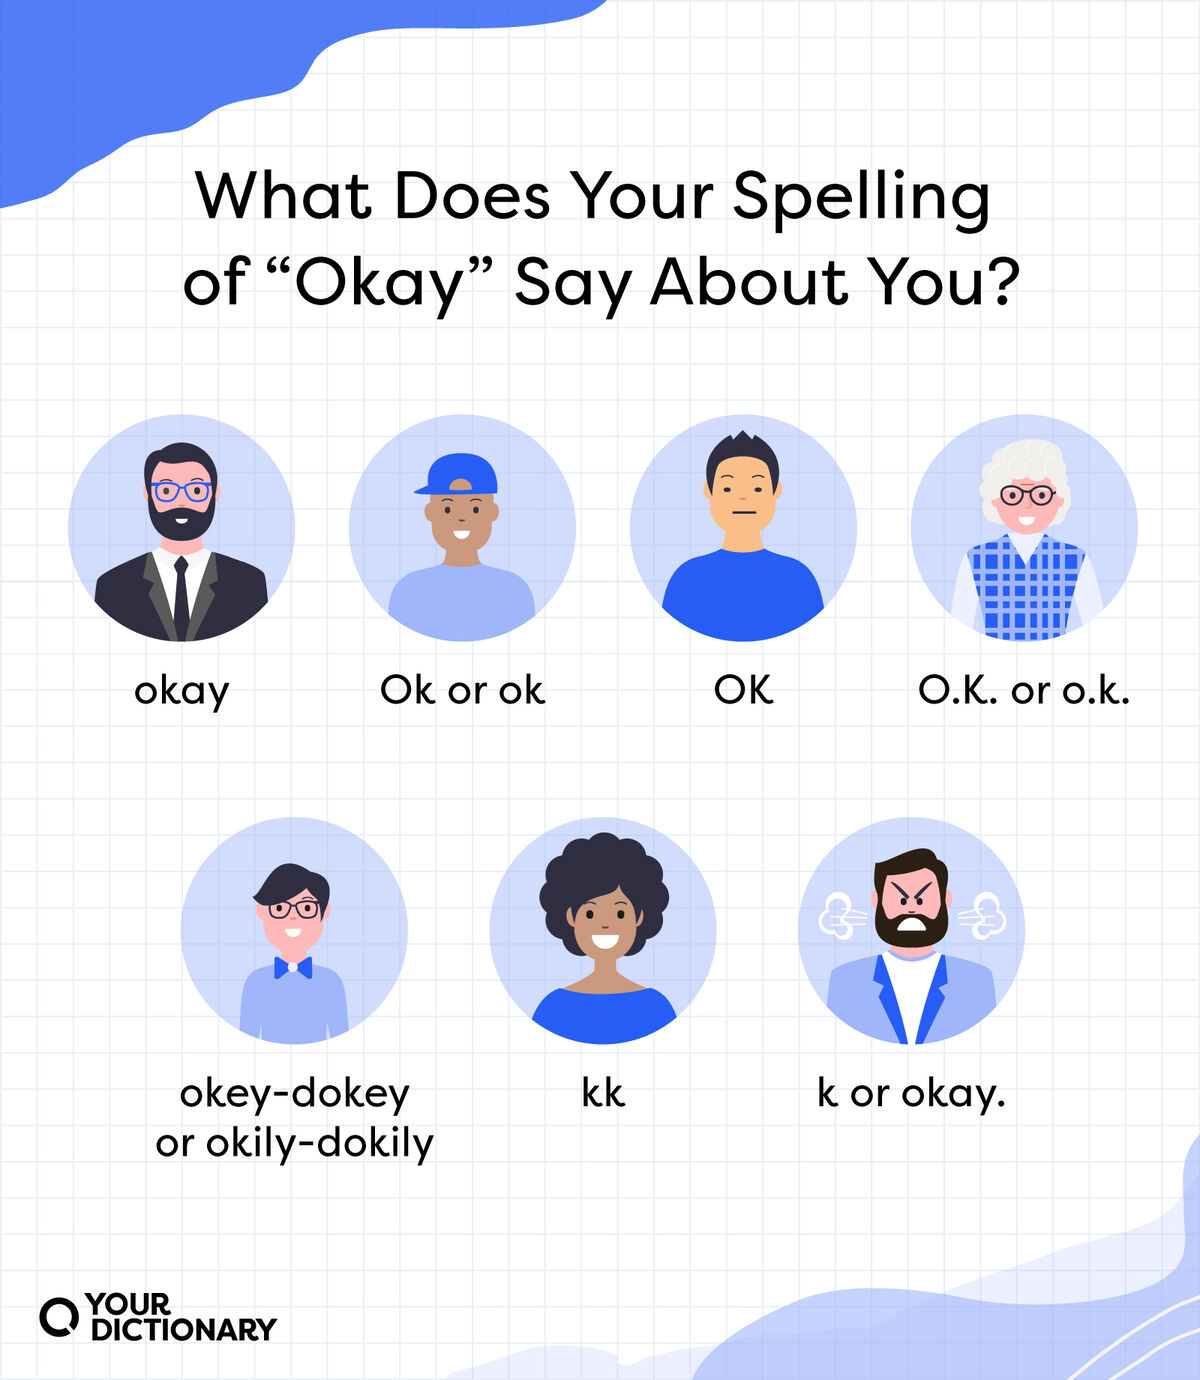 seven different ways to spell OK from the article with meanings